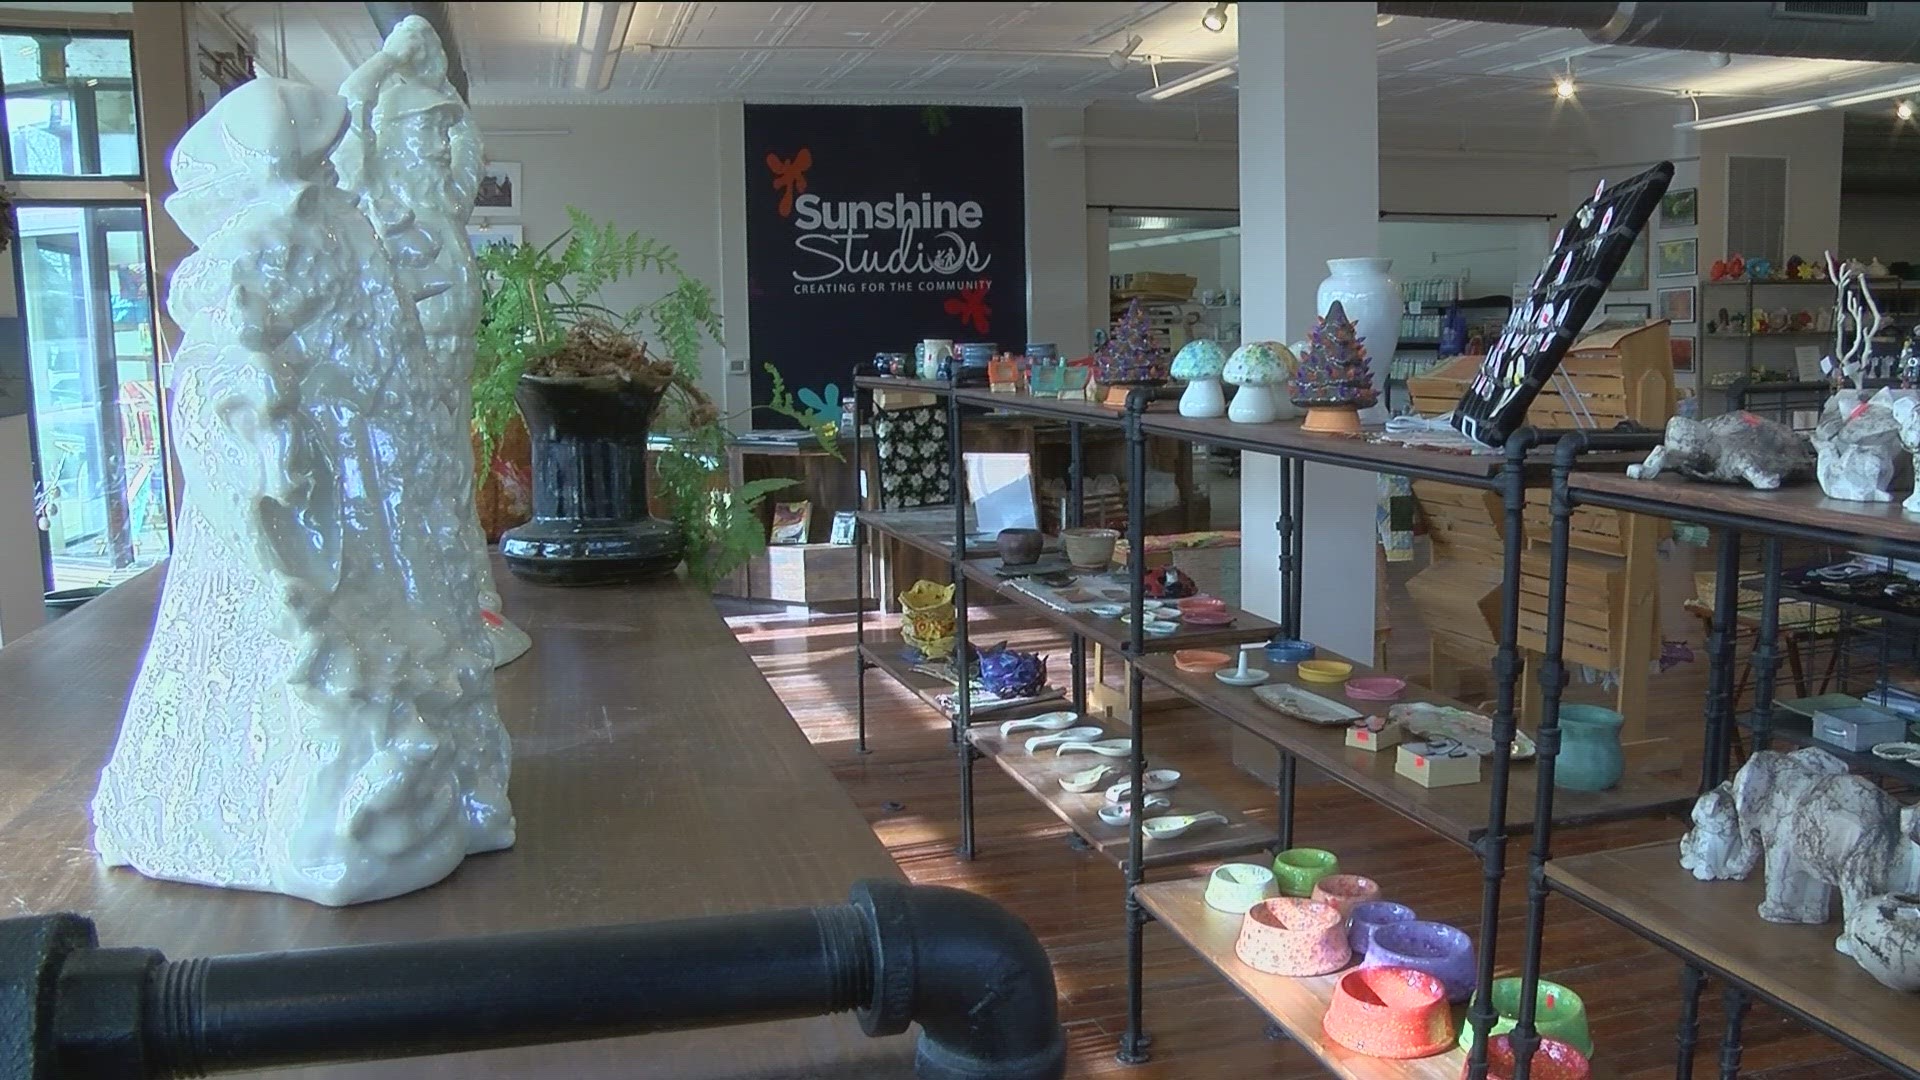 One of the biggest accomplishments of Sunshine Communities is Georgette's Grounds and Gifts in Maumee.